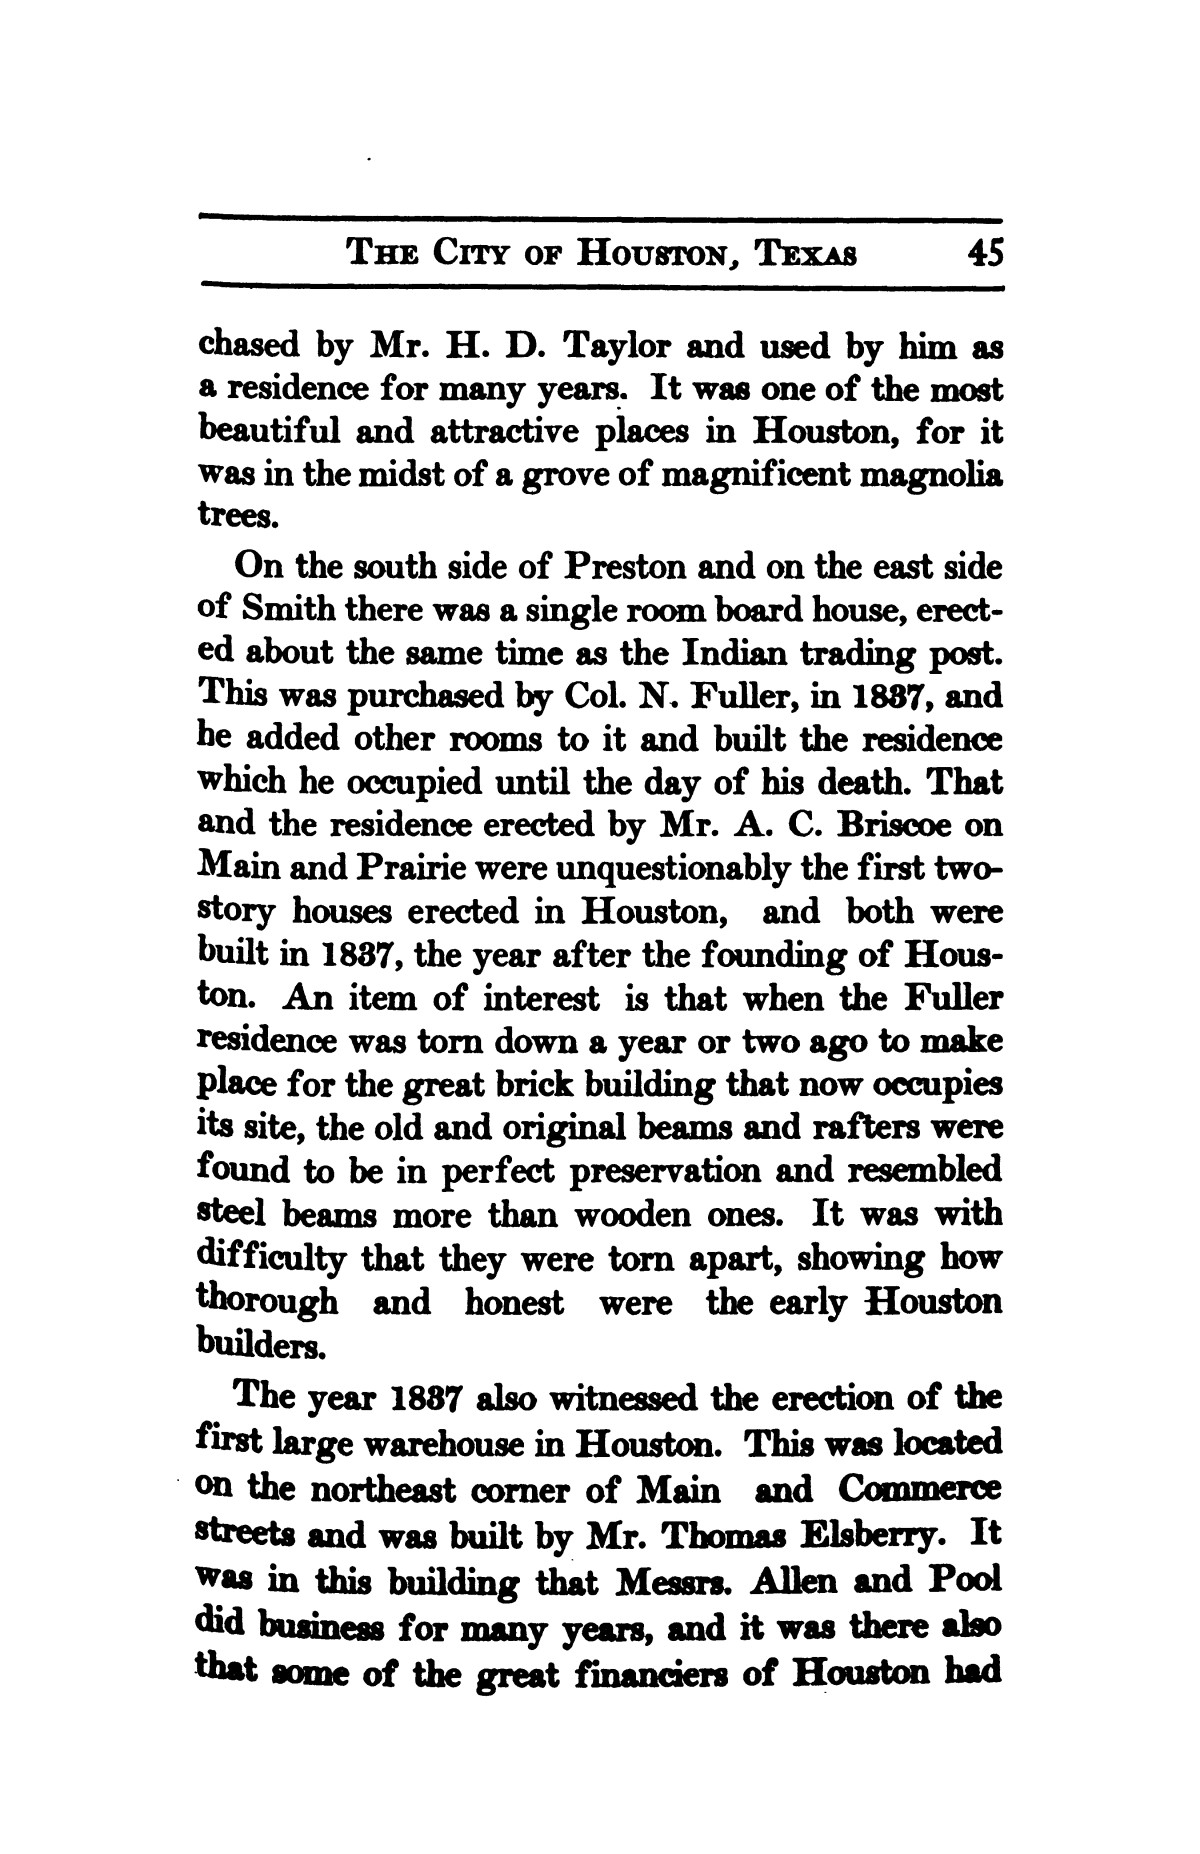 A thumb-nail history of the city of Houston, Texas, from its founding in 1836 to the year 1912
                                                
                                                    45
                                                